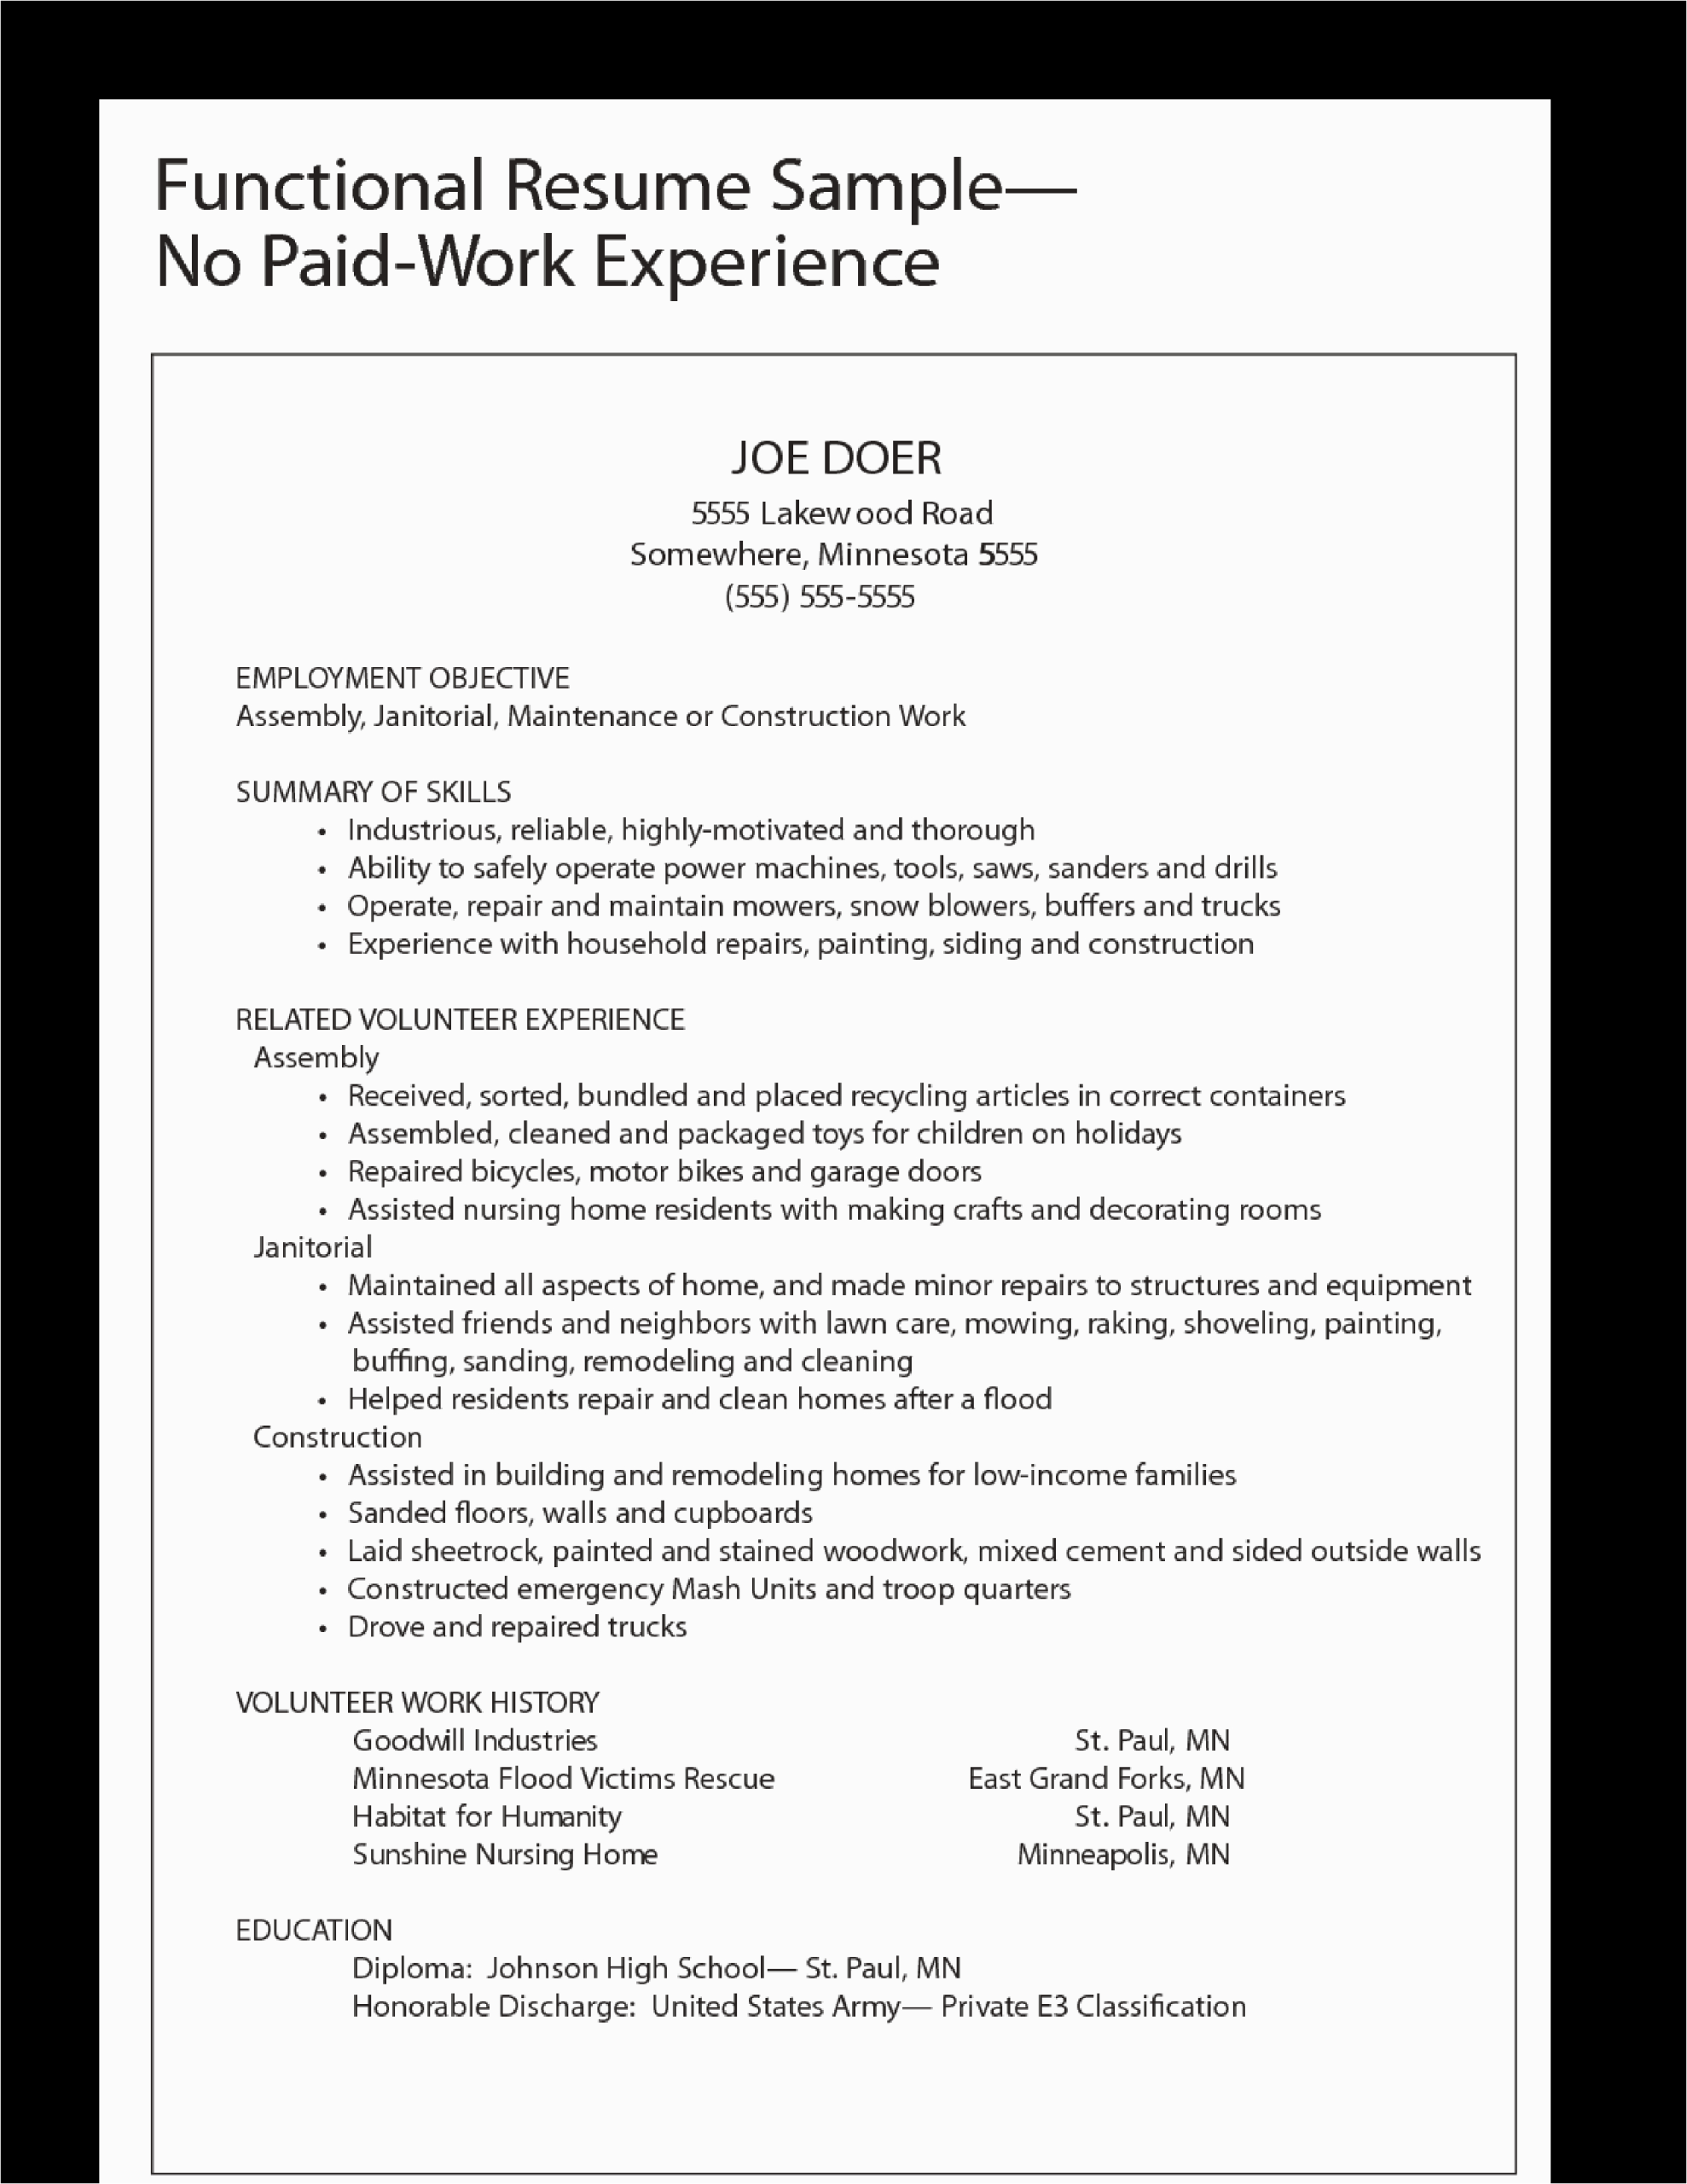 Job Experience On A Resume Sample Functional Work Experience Resume Sample